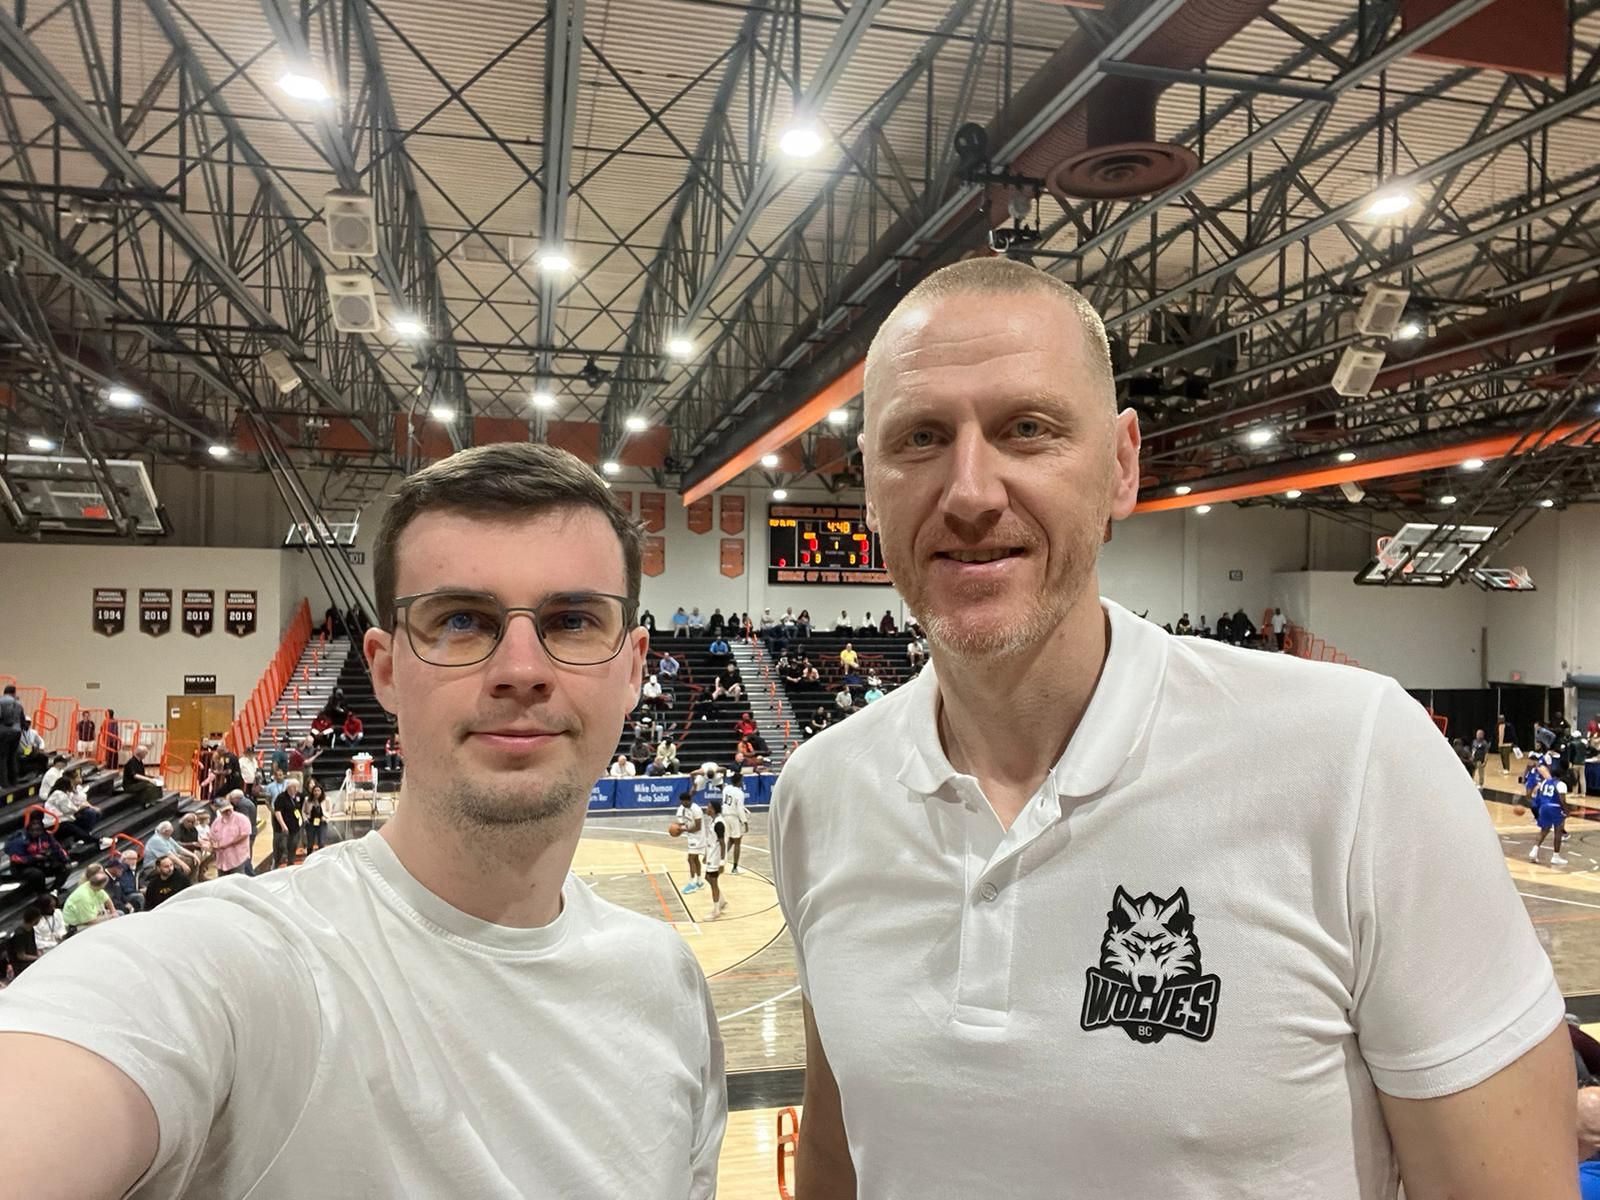 Wolves Twinsbet’s Zavackas and Bružas attended Portsmouth Invitational Tournament